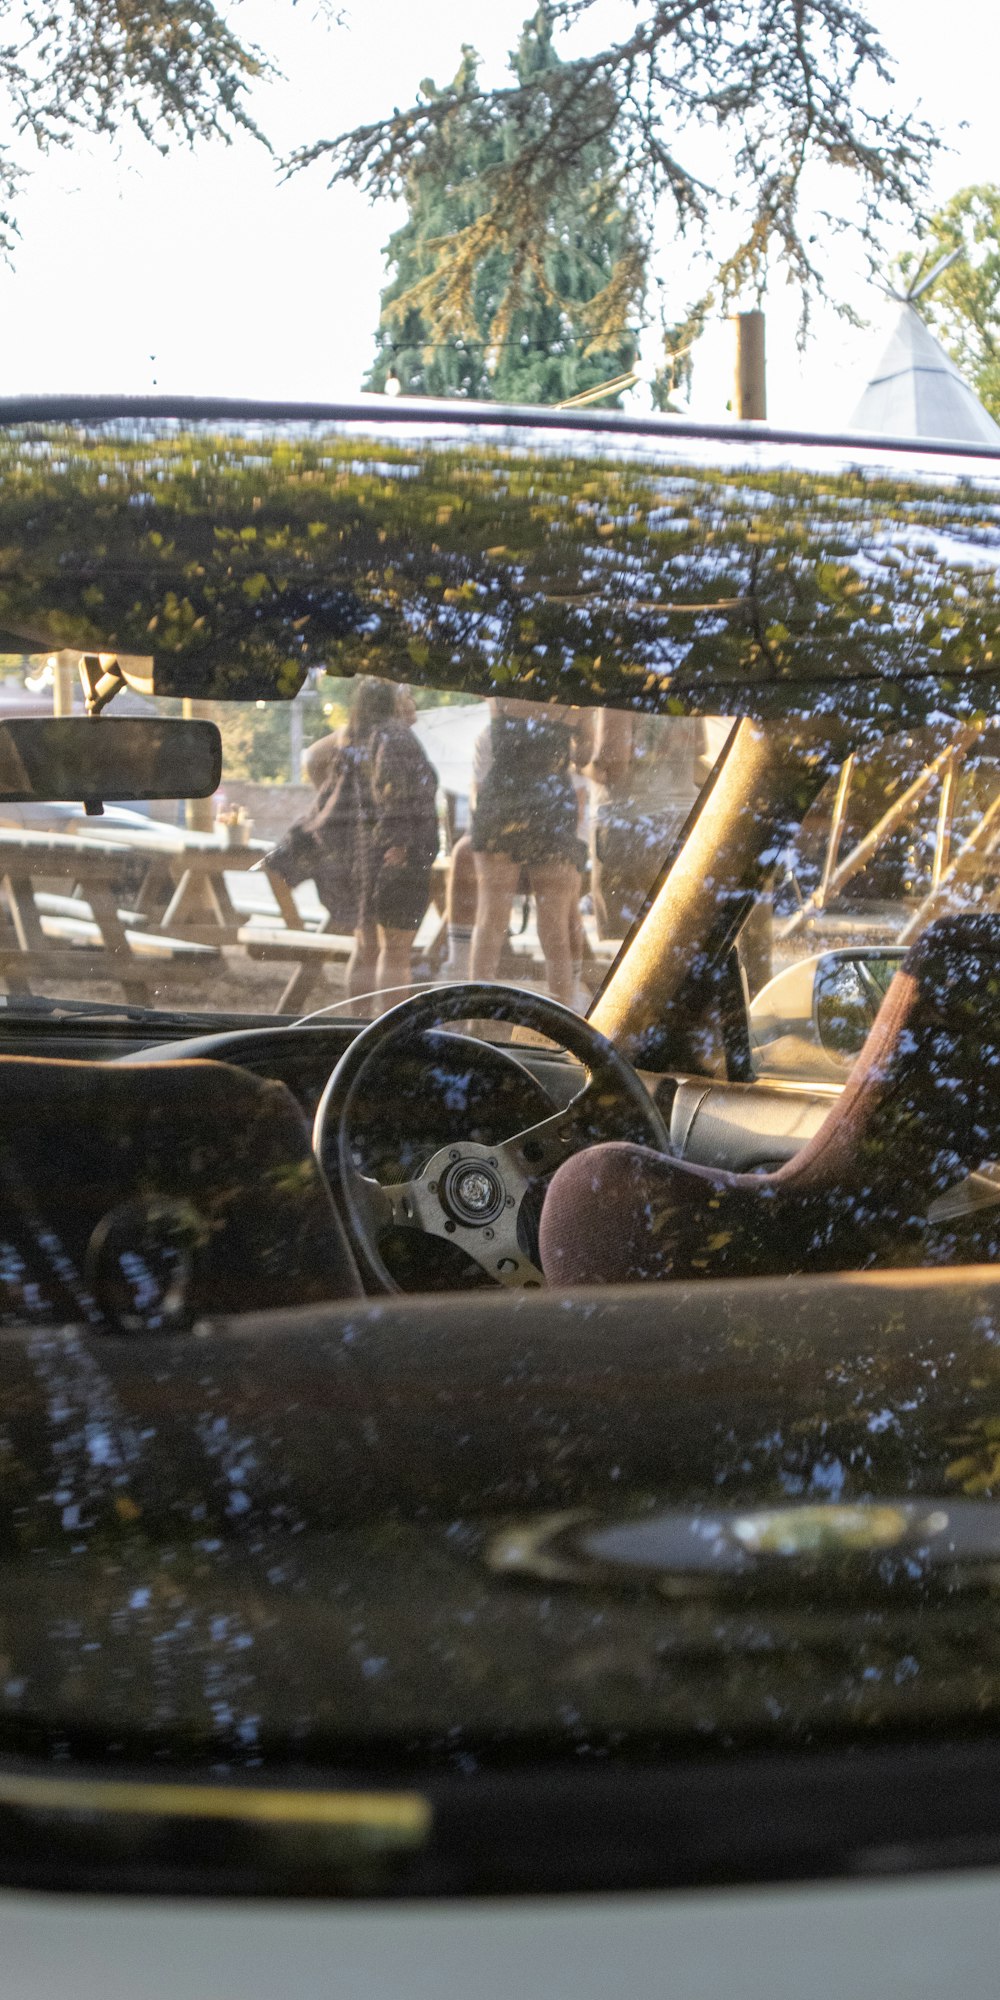 a car with a reflection of people in it